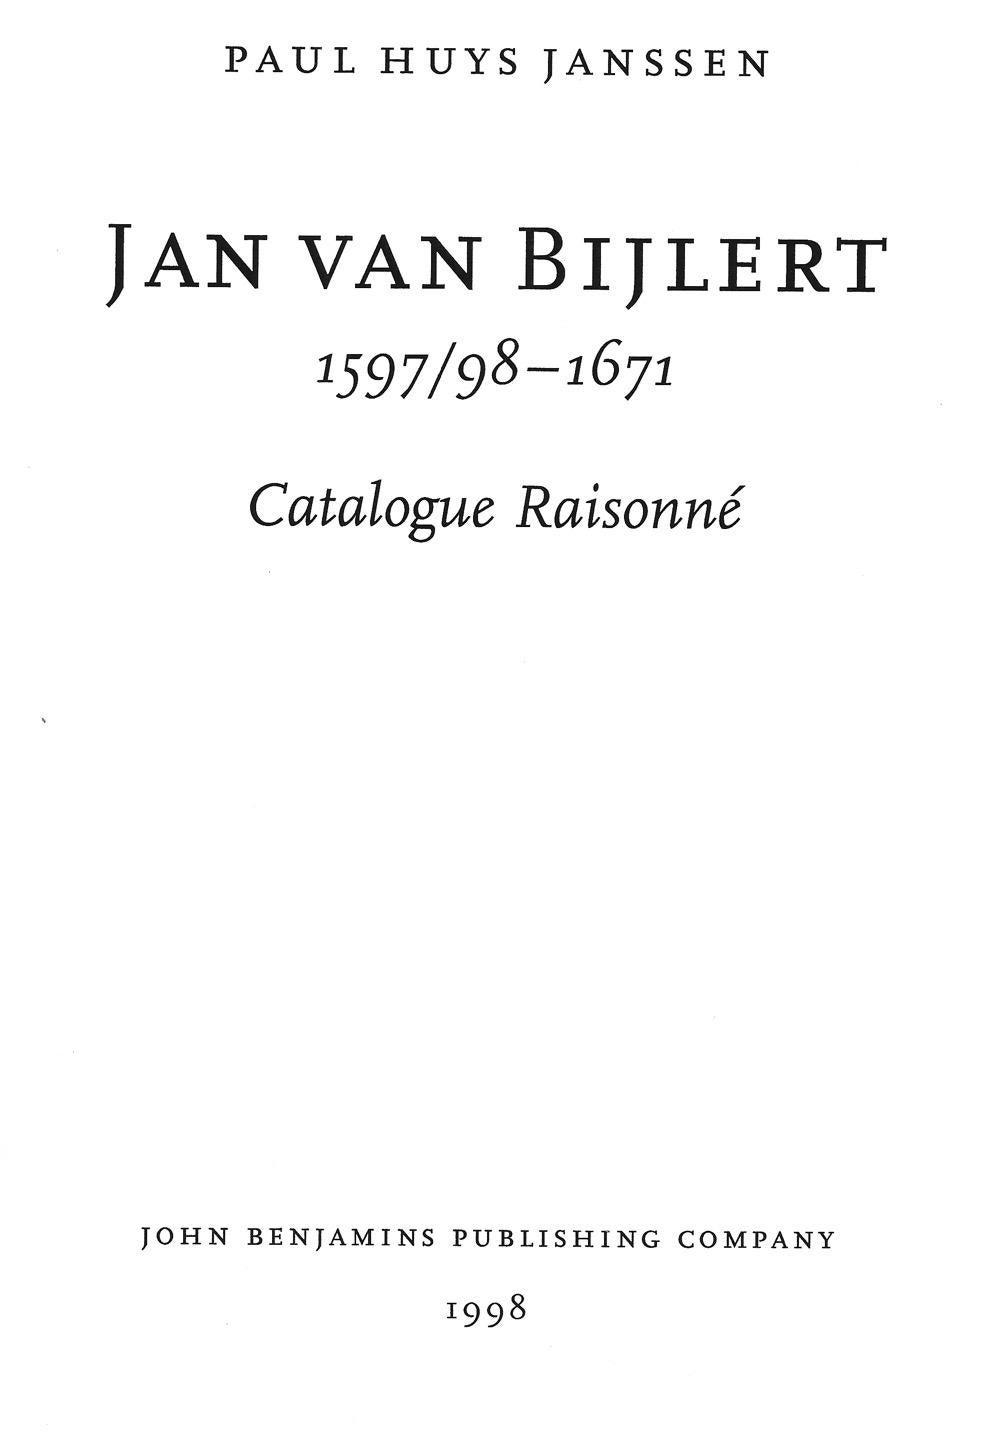 This masterpiece by Dutch painter Jan van Bjjlert (1597/98-1671 ) is listed in the Catalogue Raisonné (1998) under no. 68 by Docteur Paul Huys Jansseen, the world re-known expert on Jan van Bijlert. Dr. Huys Jansseen performed an in person